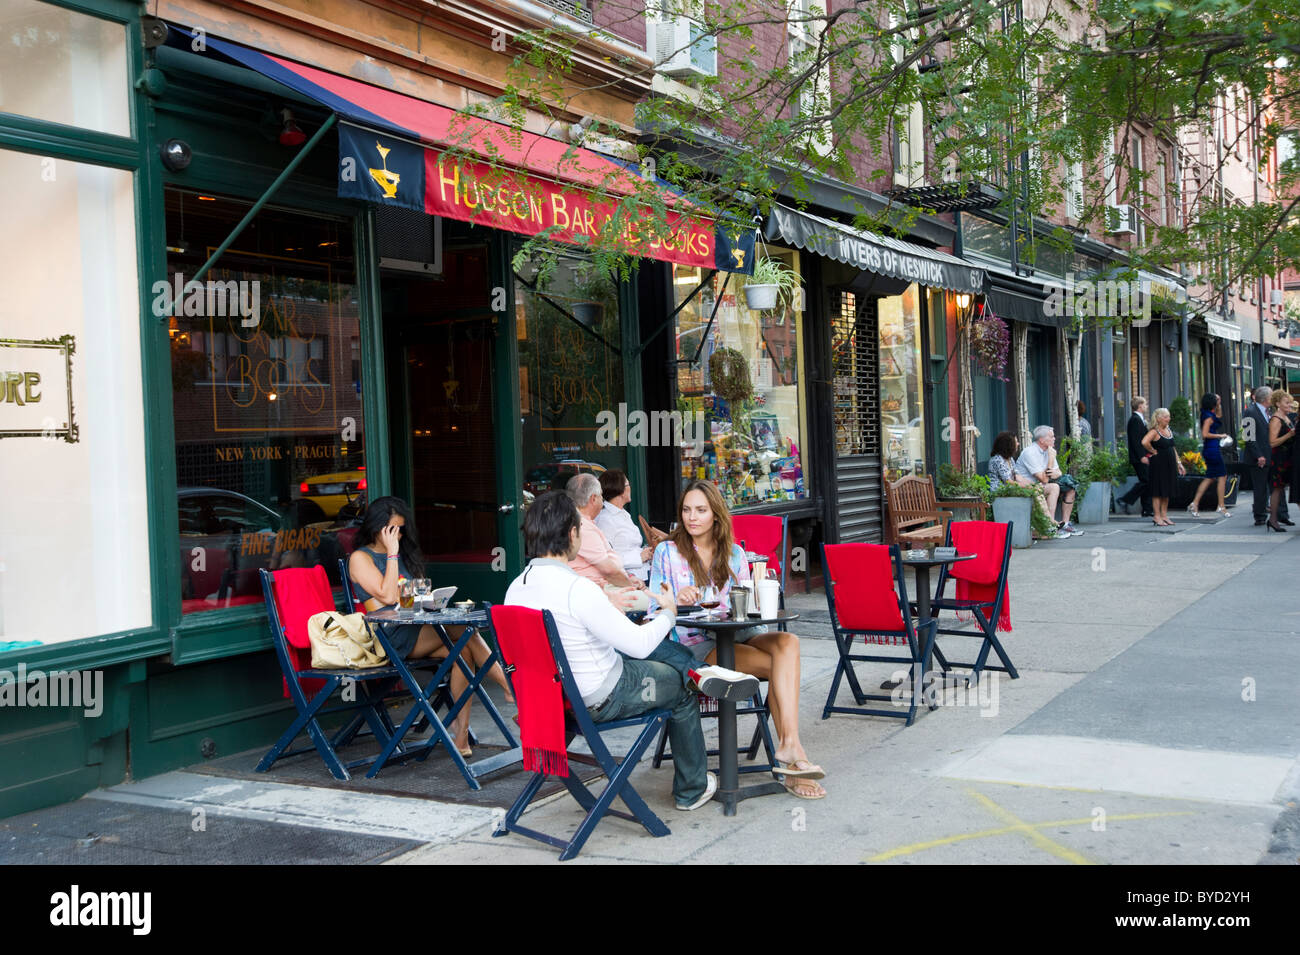 Bar and Books on Hudson Street in Greenwich Village, New York City, America, USA Stock Photo